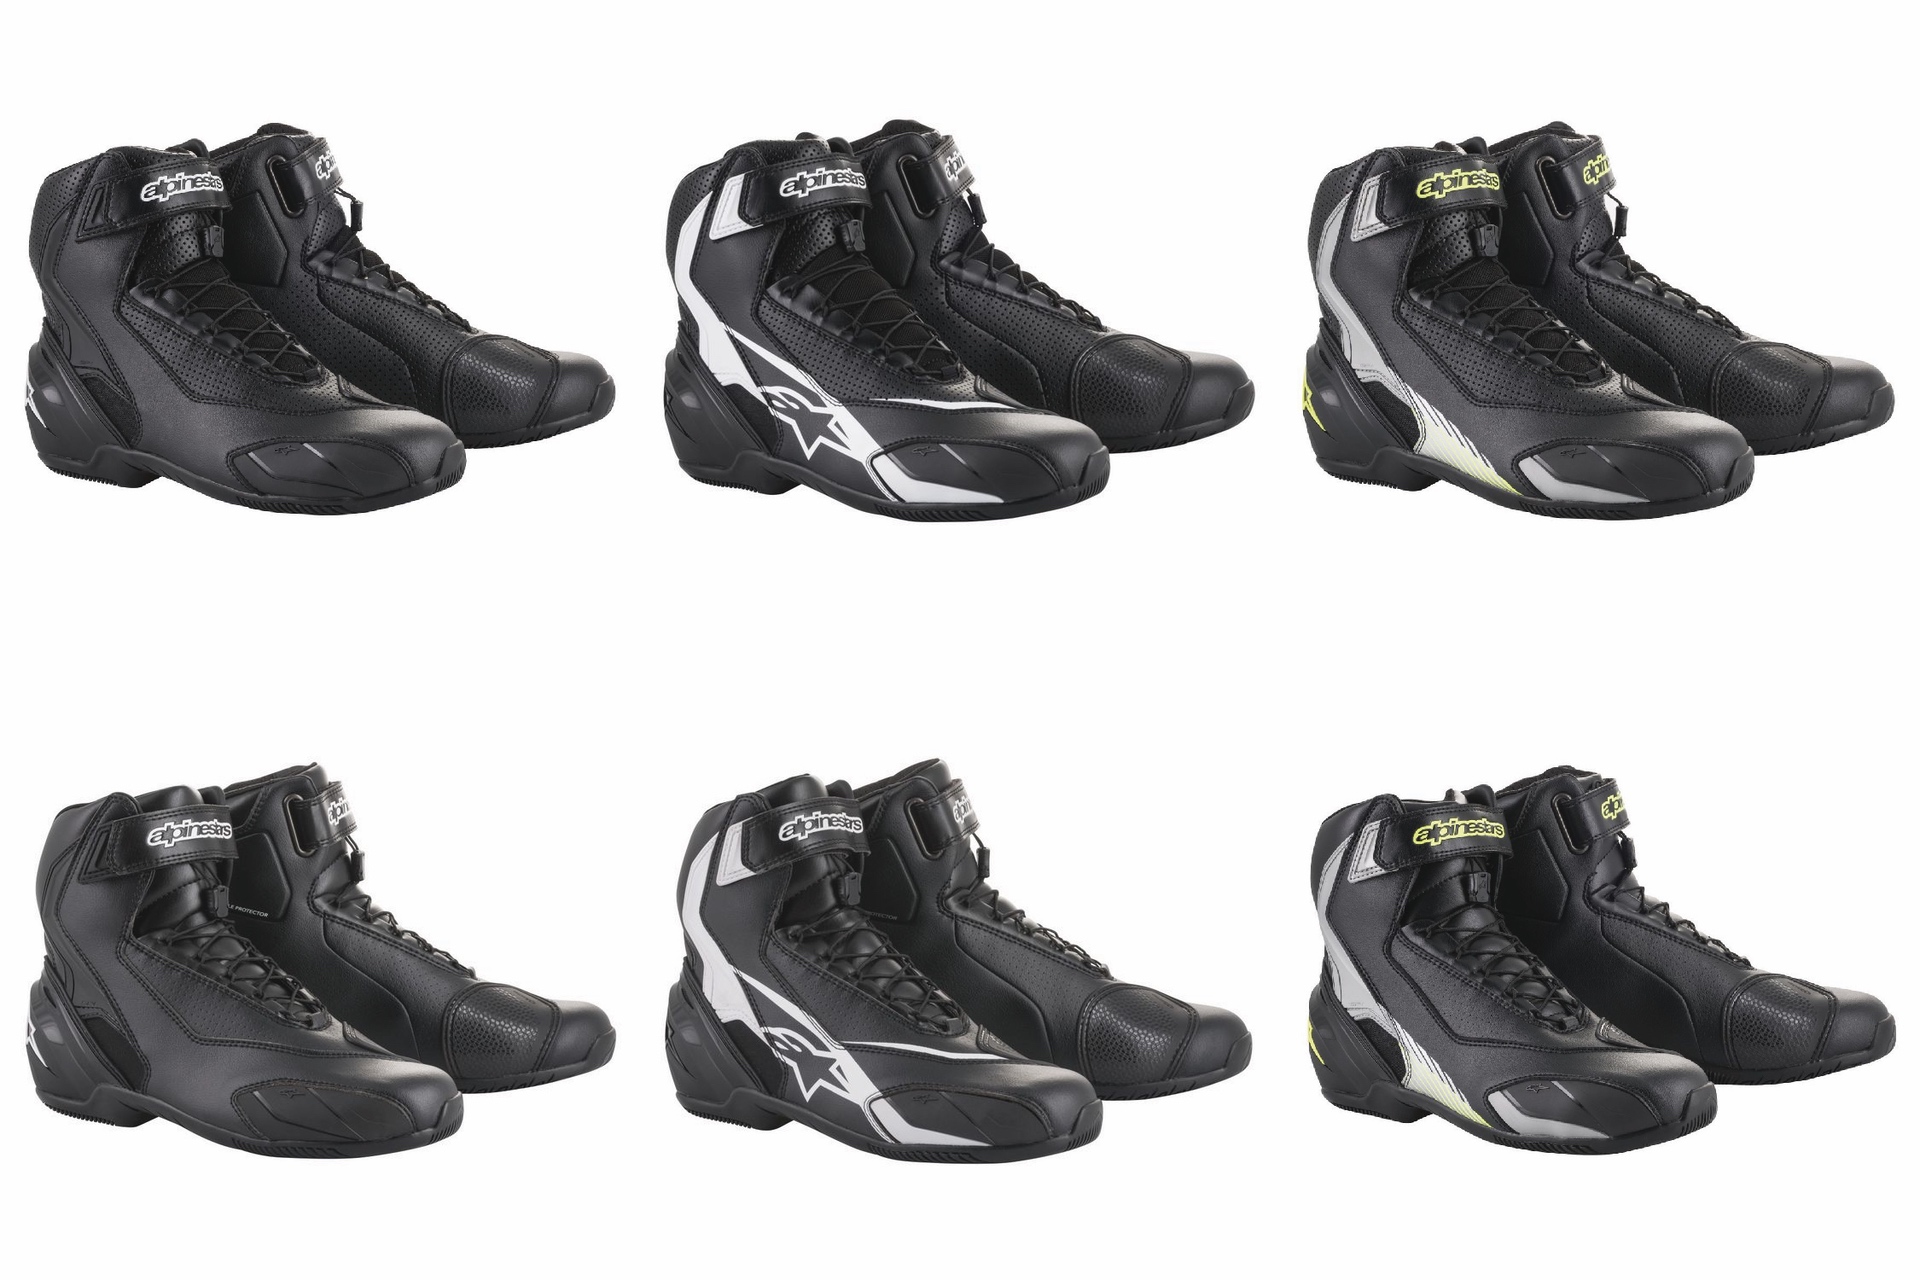 Collage of Alpinestars motorcycle boots and shoes